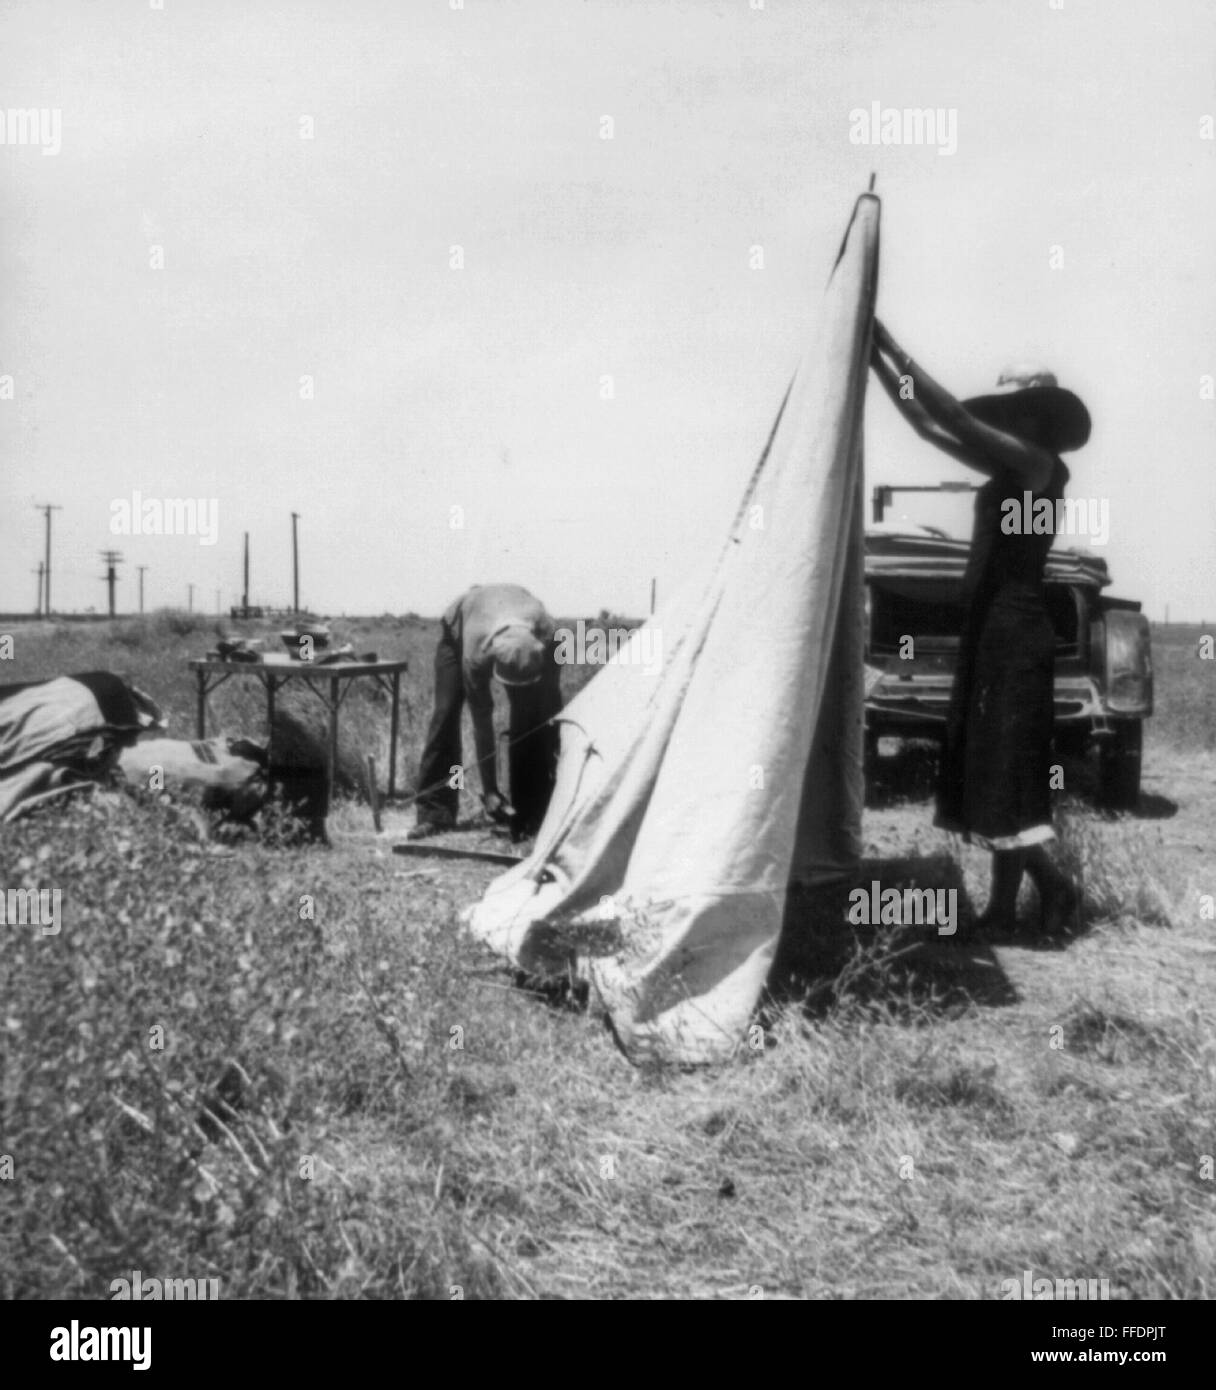 MIGRANT FARMERS, 1937. /nMigrant potato pickers pitching their tent, near Shafter, California. Photograph by Dorothea Lange, May 1937. Stock Photo